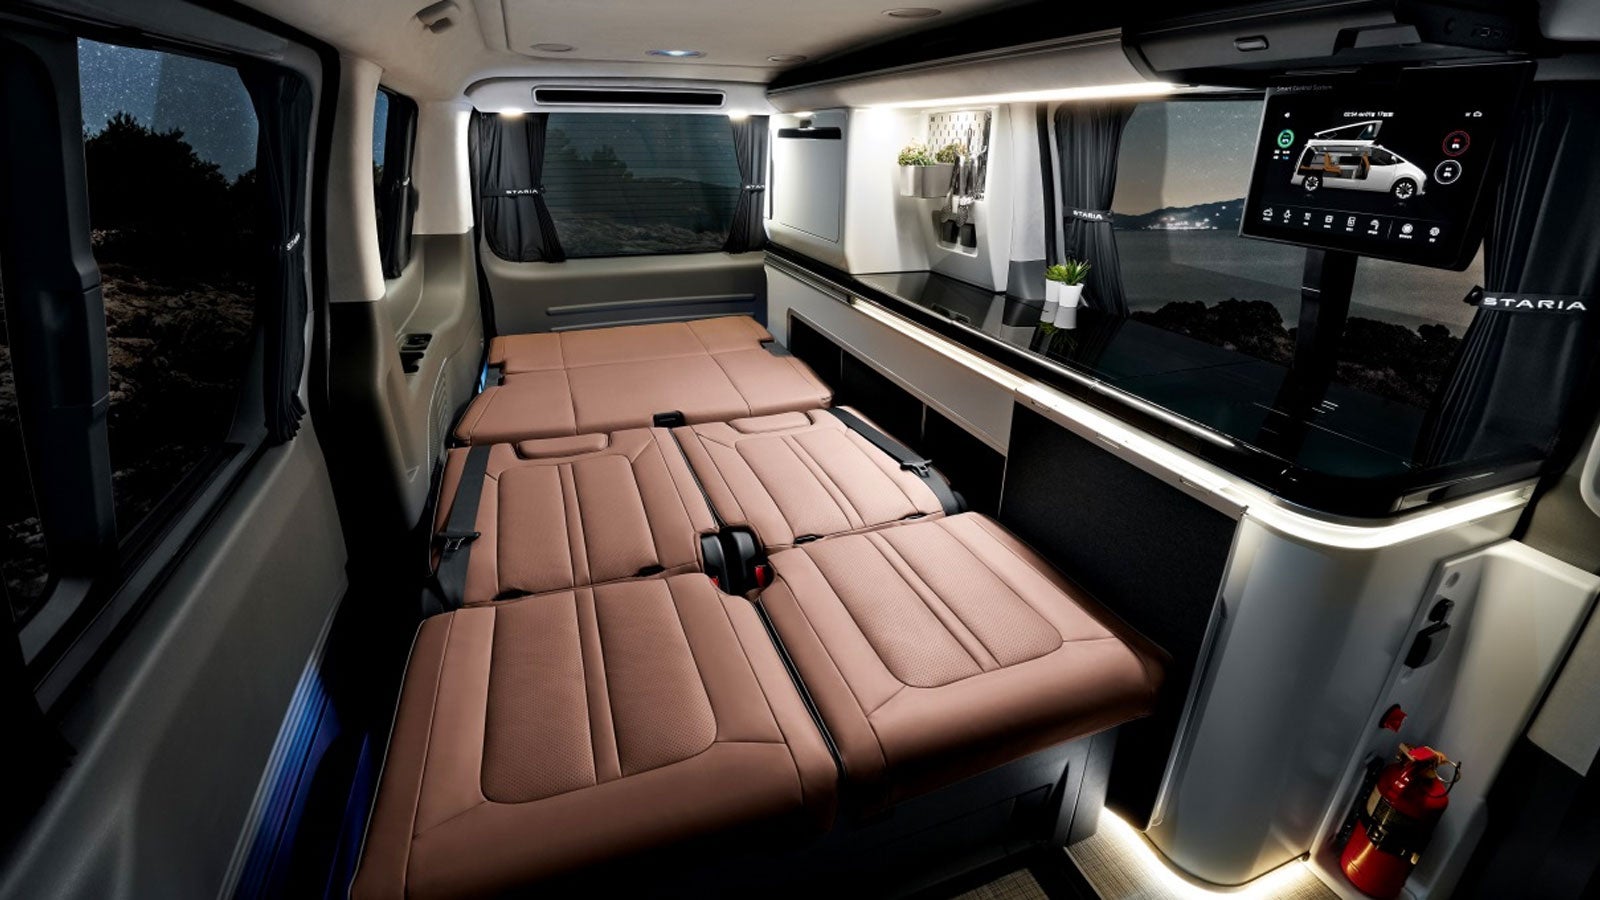 The Hyundai Staria Is the Cutesy Camper You Can’t Have